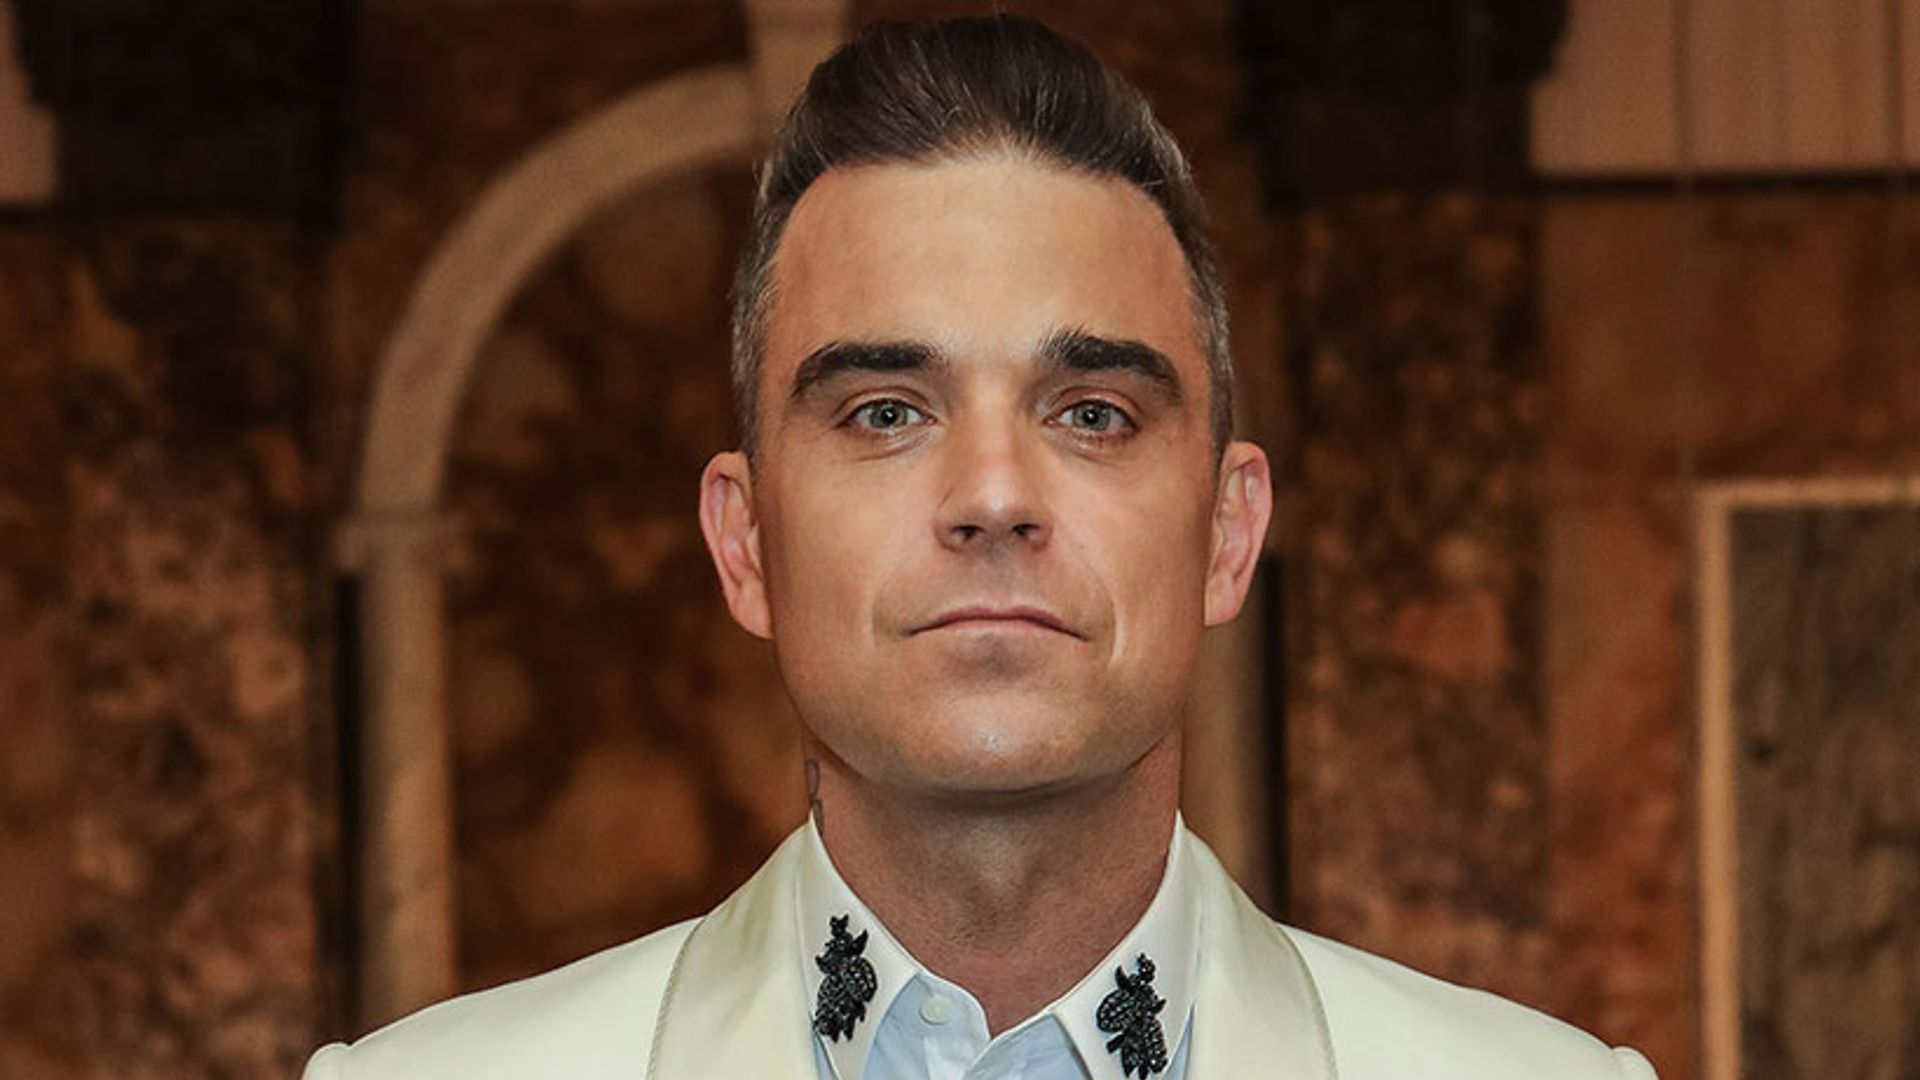 Robbie Williams reveals younger new look - see pictures